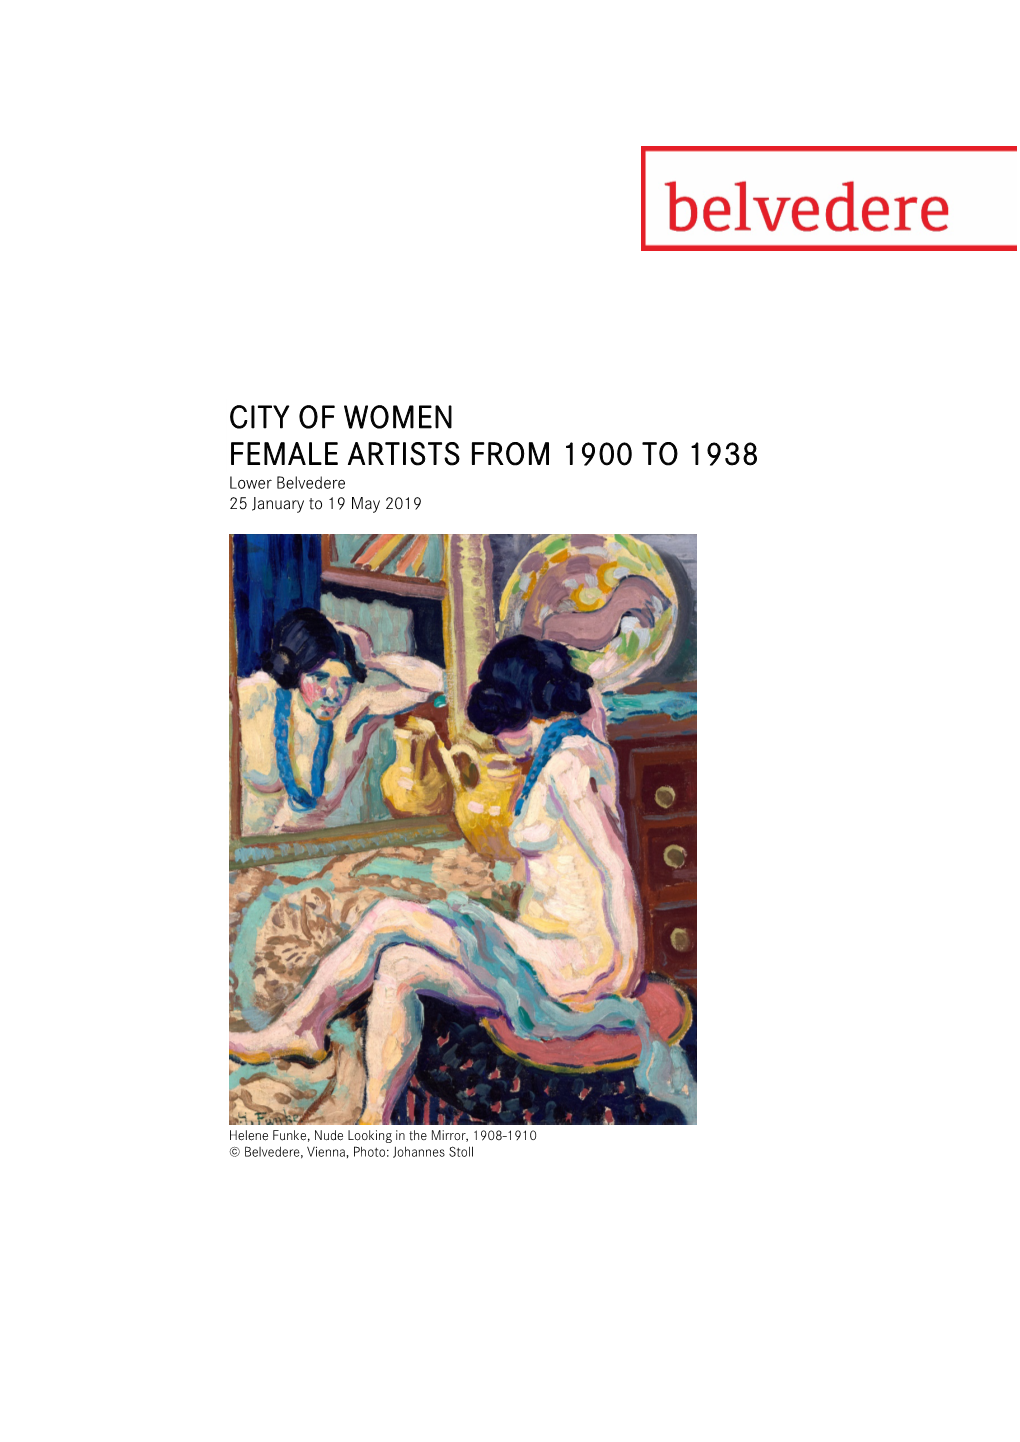 CITY of WOMEN FEMALE ARTISTS from 1900 to 1938 Lower Belvedere 25 January to 19 May 2019